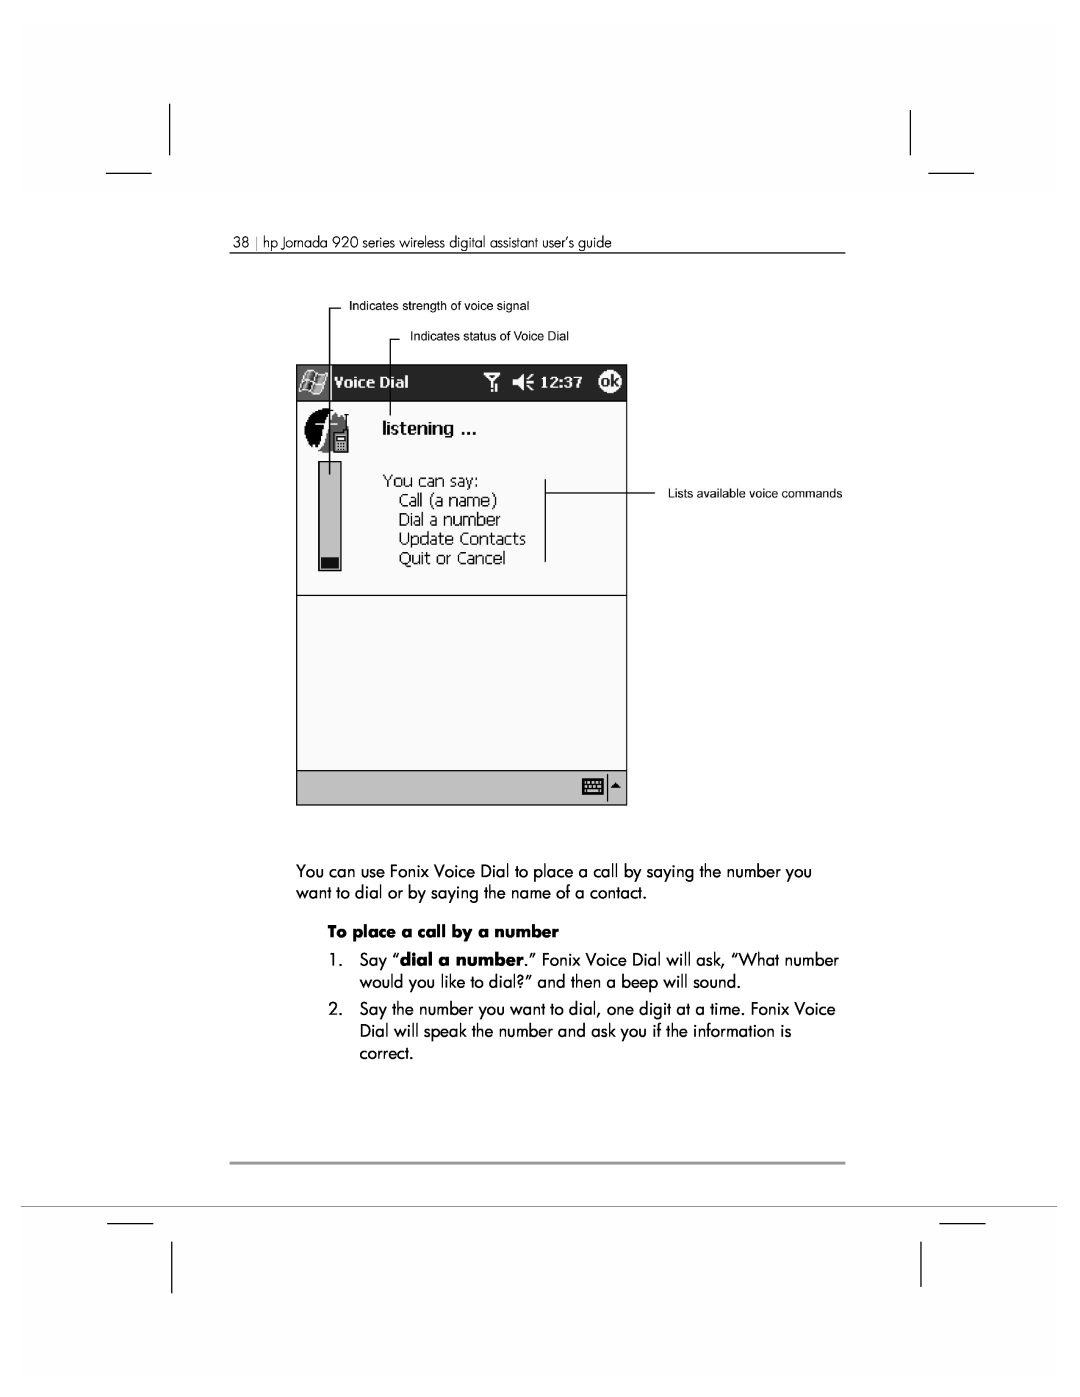 HP manual To place a call by a number, hp Jornada 920 series wireless digital assistant user’s guide 